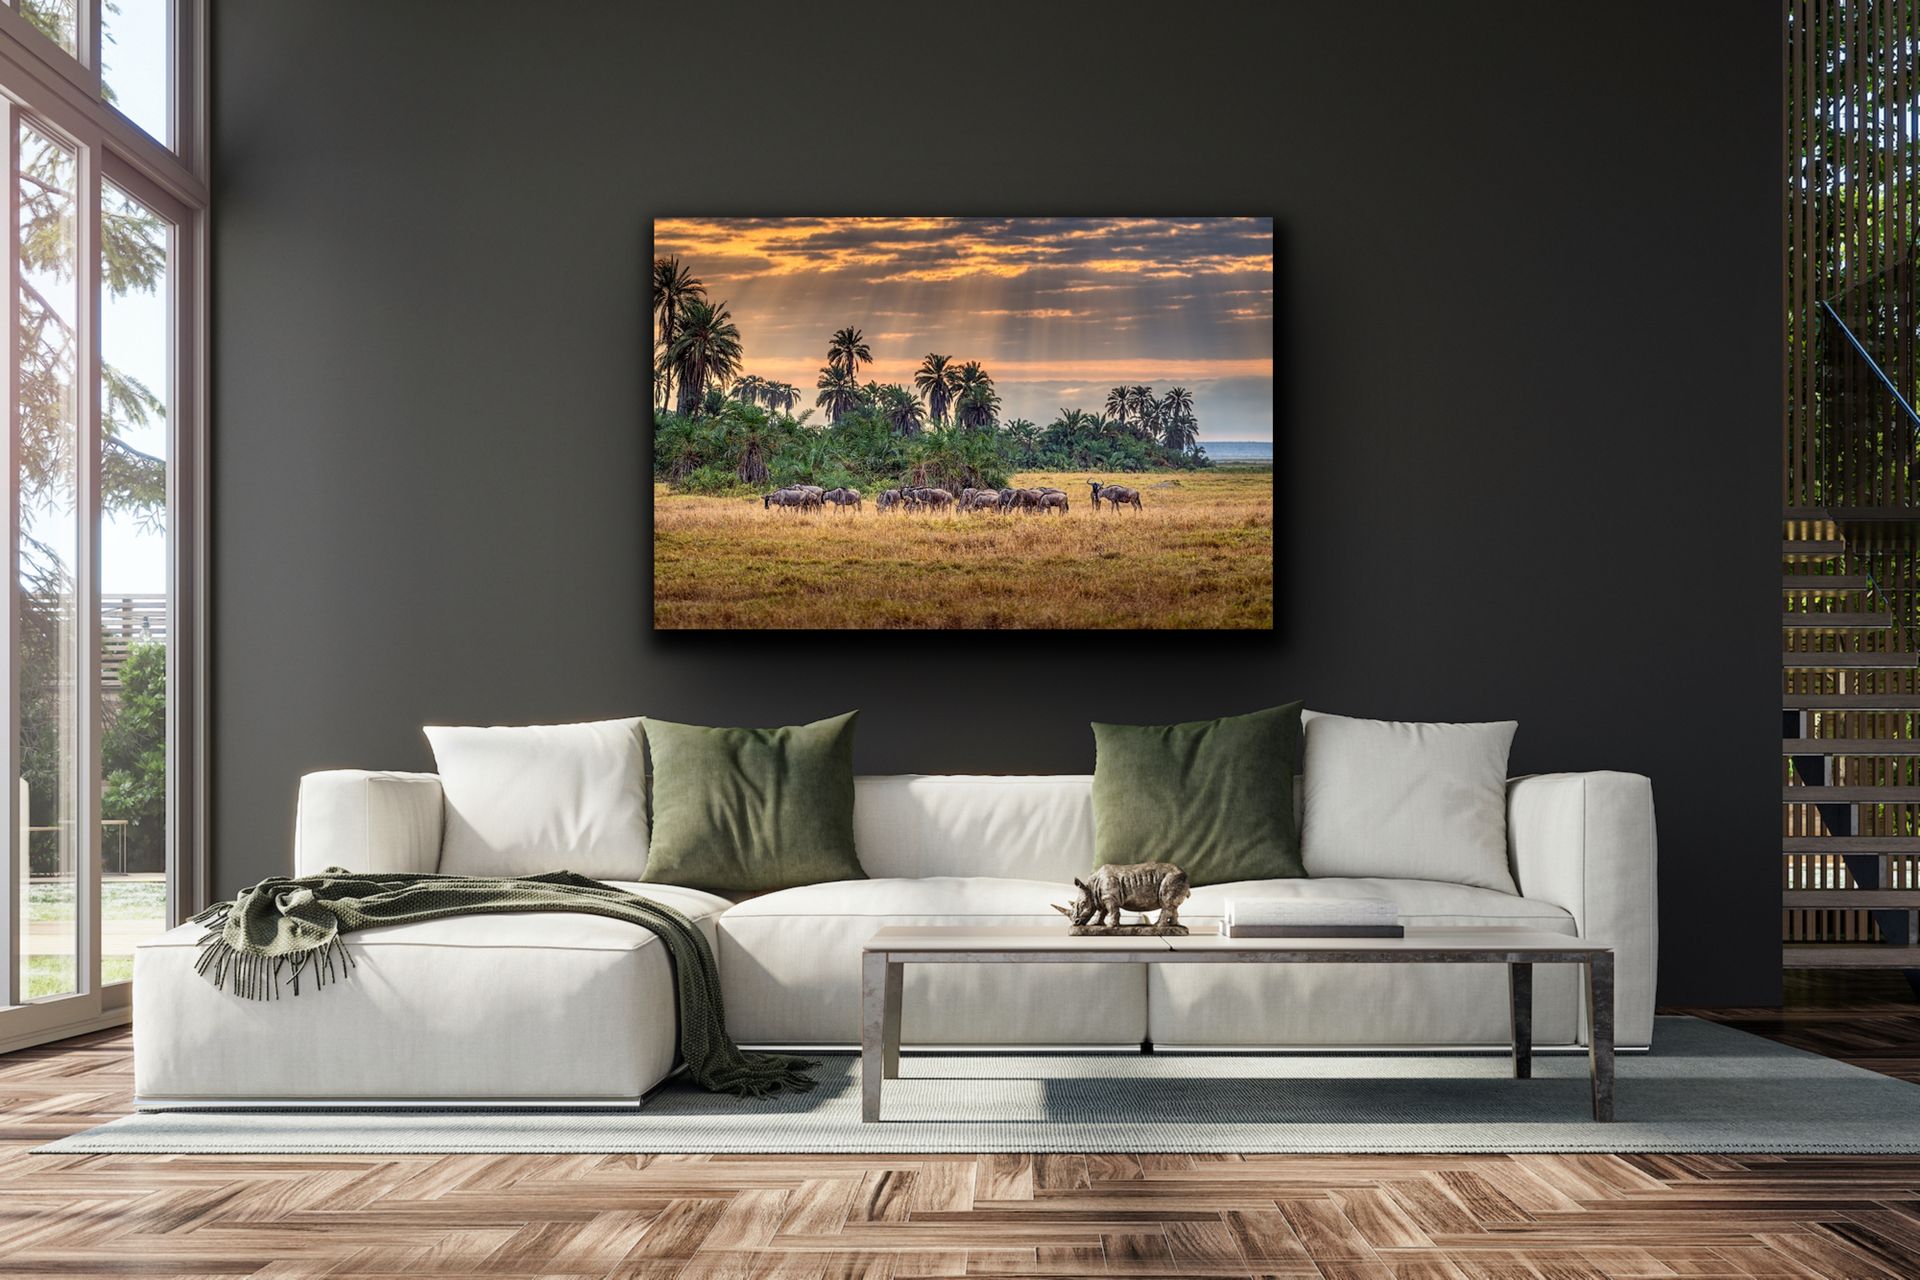 Example of an image named Wildebeest Jungle D855364 on a wall of a modern home